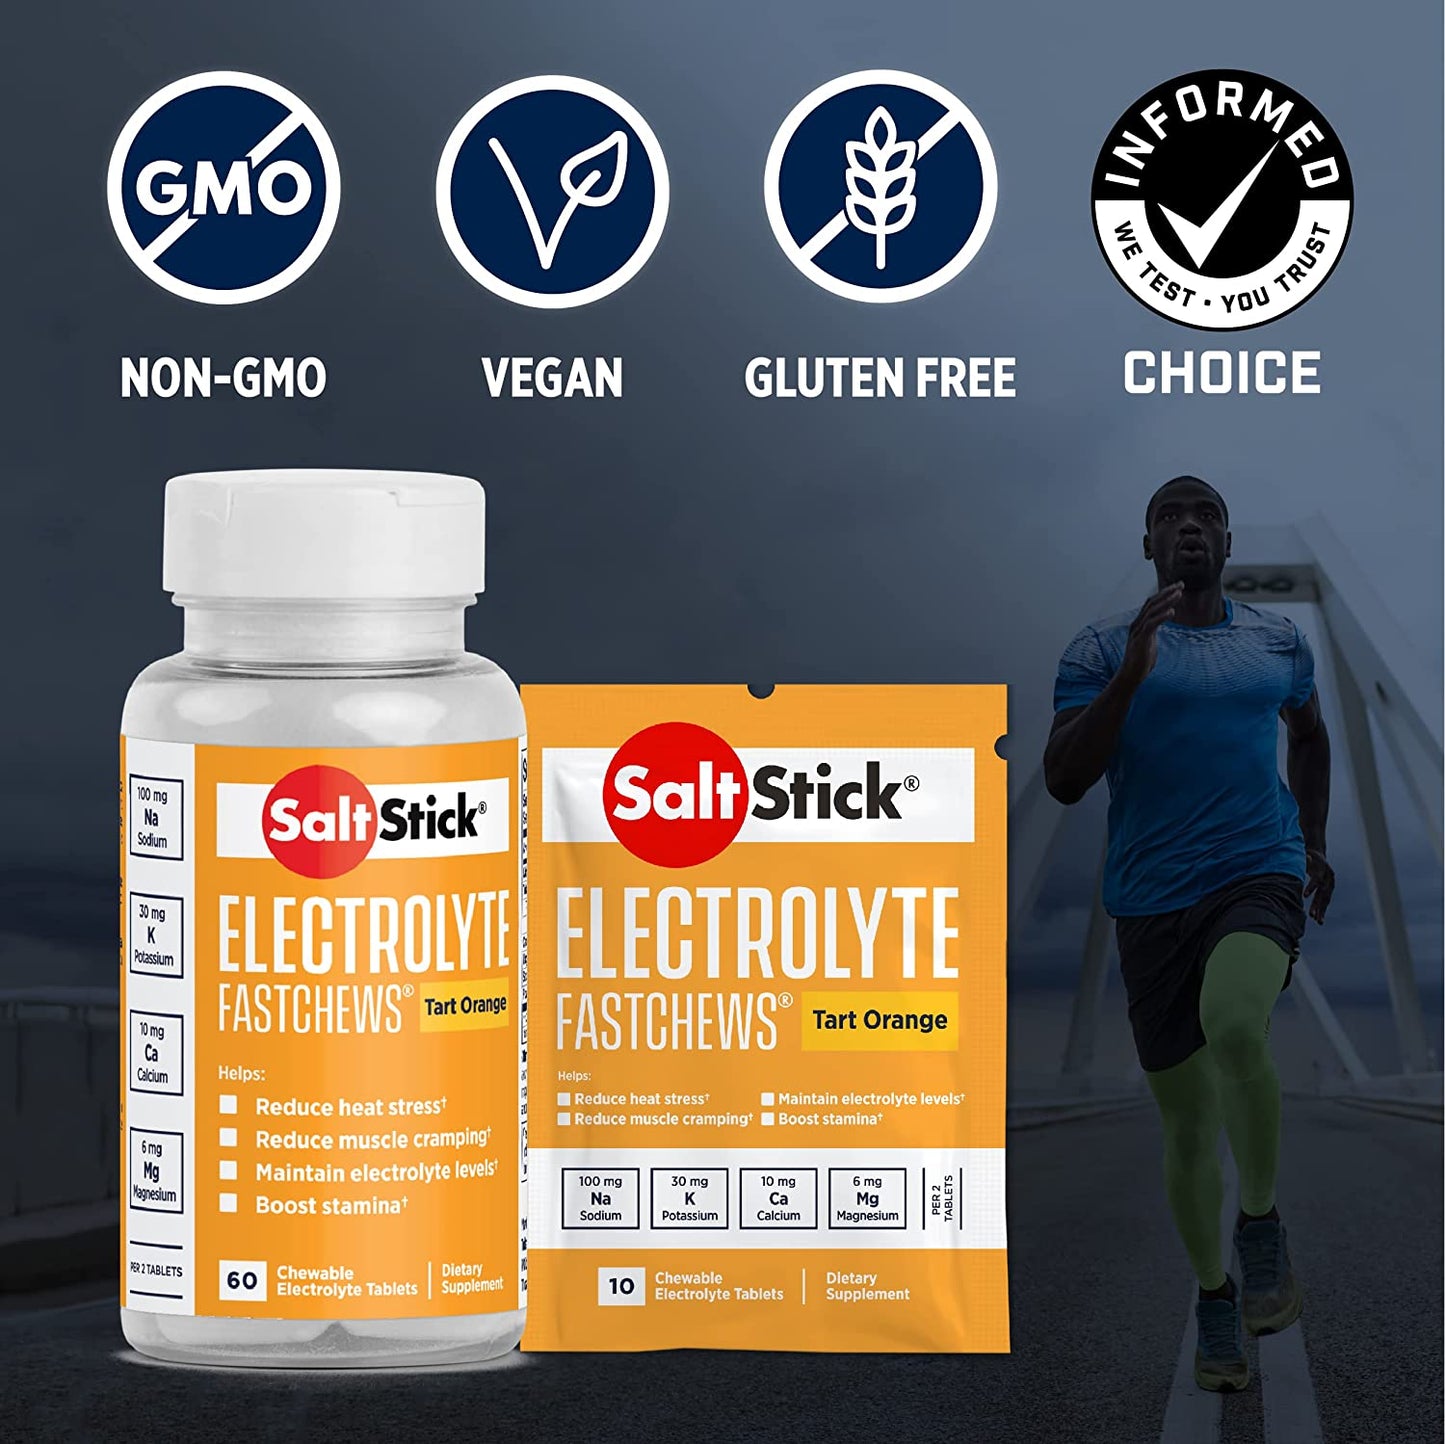 Electrolyte Fastchews Chewable Tablets | 120 Count - Orange | Salt Tablets for Runners and Sports Nutrition, Hydration Tablets, Electrolyte Chews | 12 Packets, 10 Tablets Each